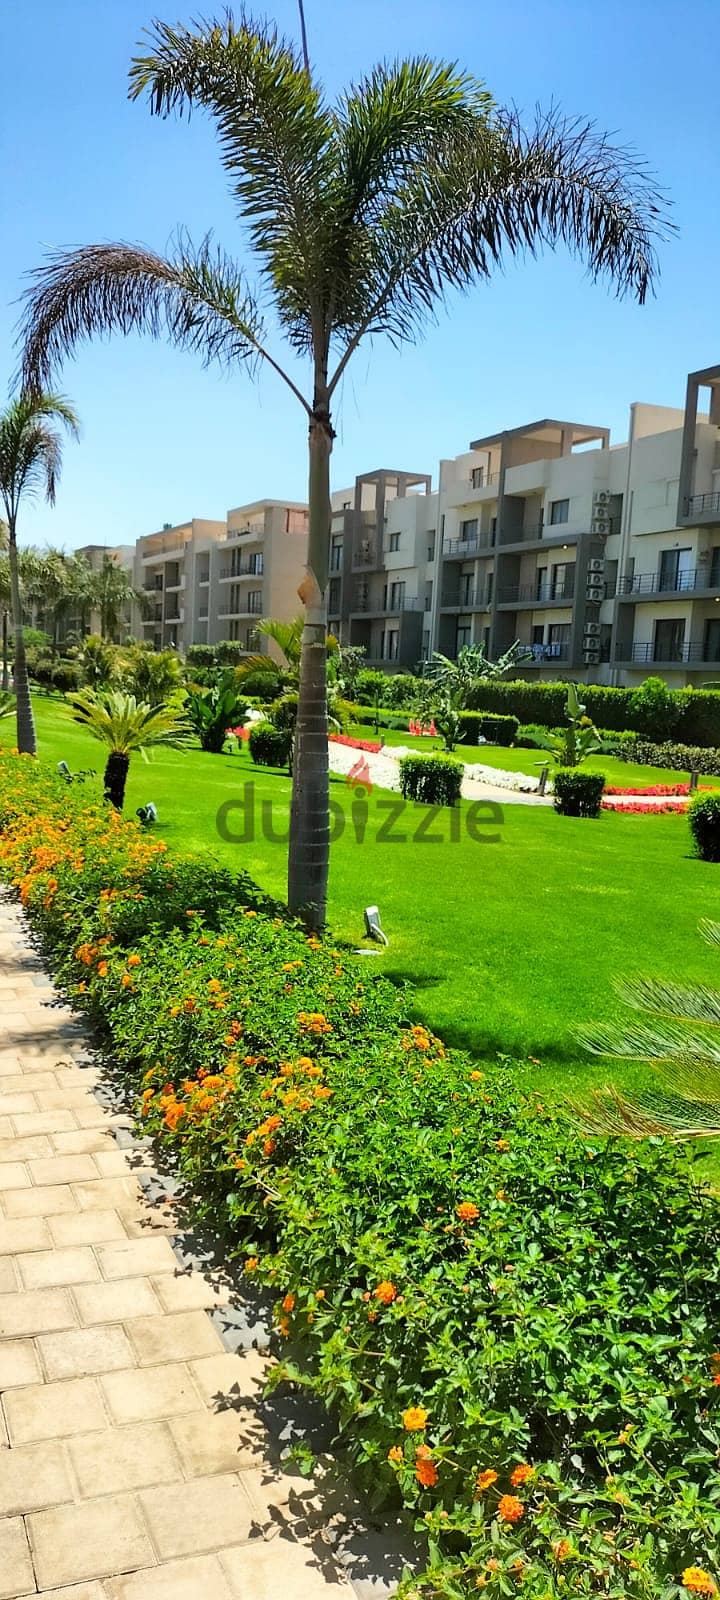 Penthouse for sale in installments, fully finished, with air conditioners, at a price including maintenance, clubhouse 3